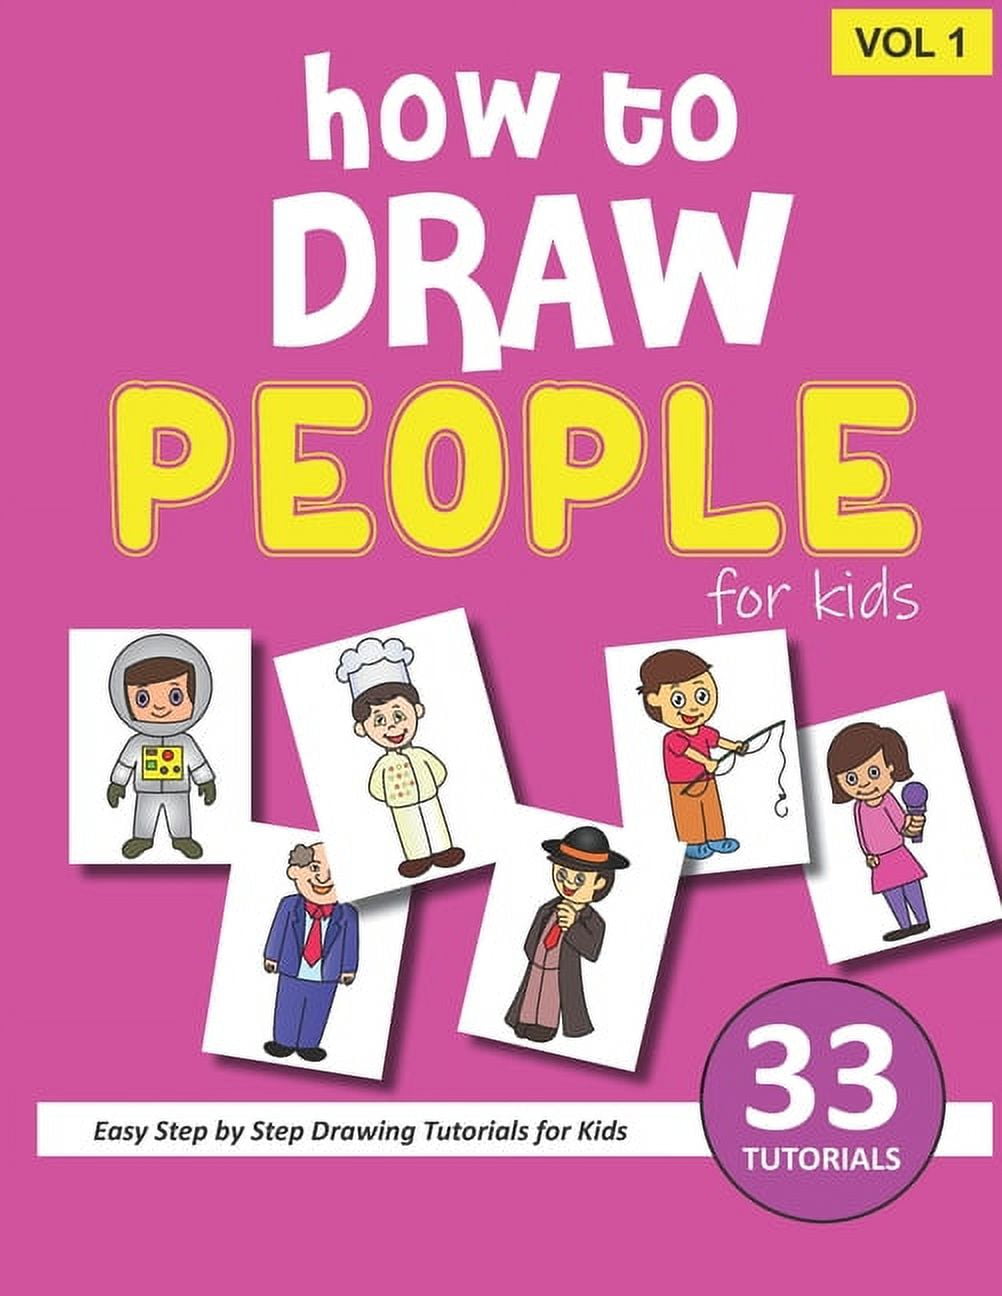 How to Draw People for Kids 4-8: Learn to Draw 101 Fun People with